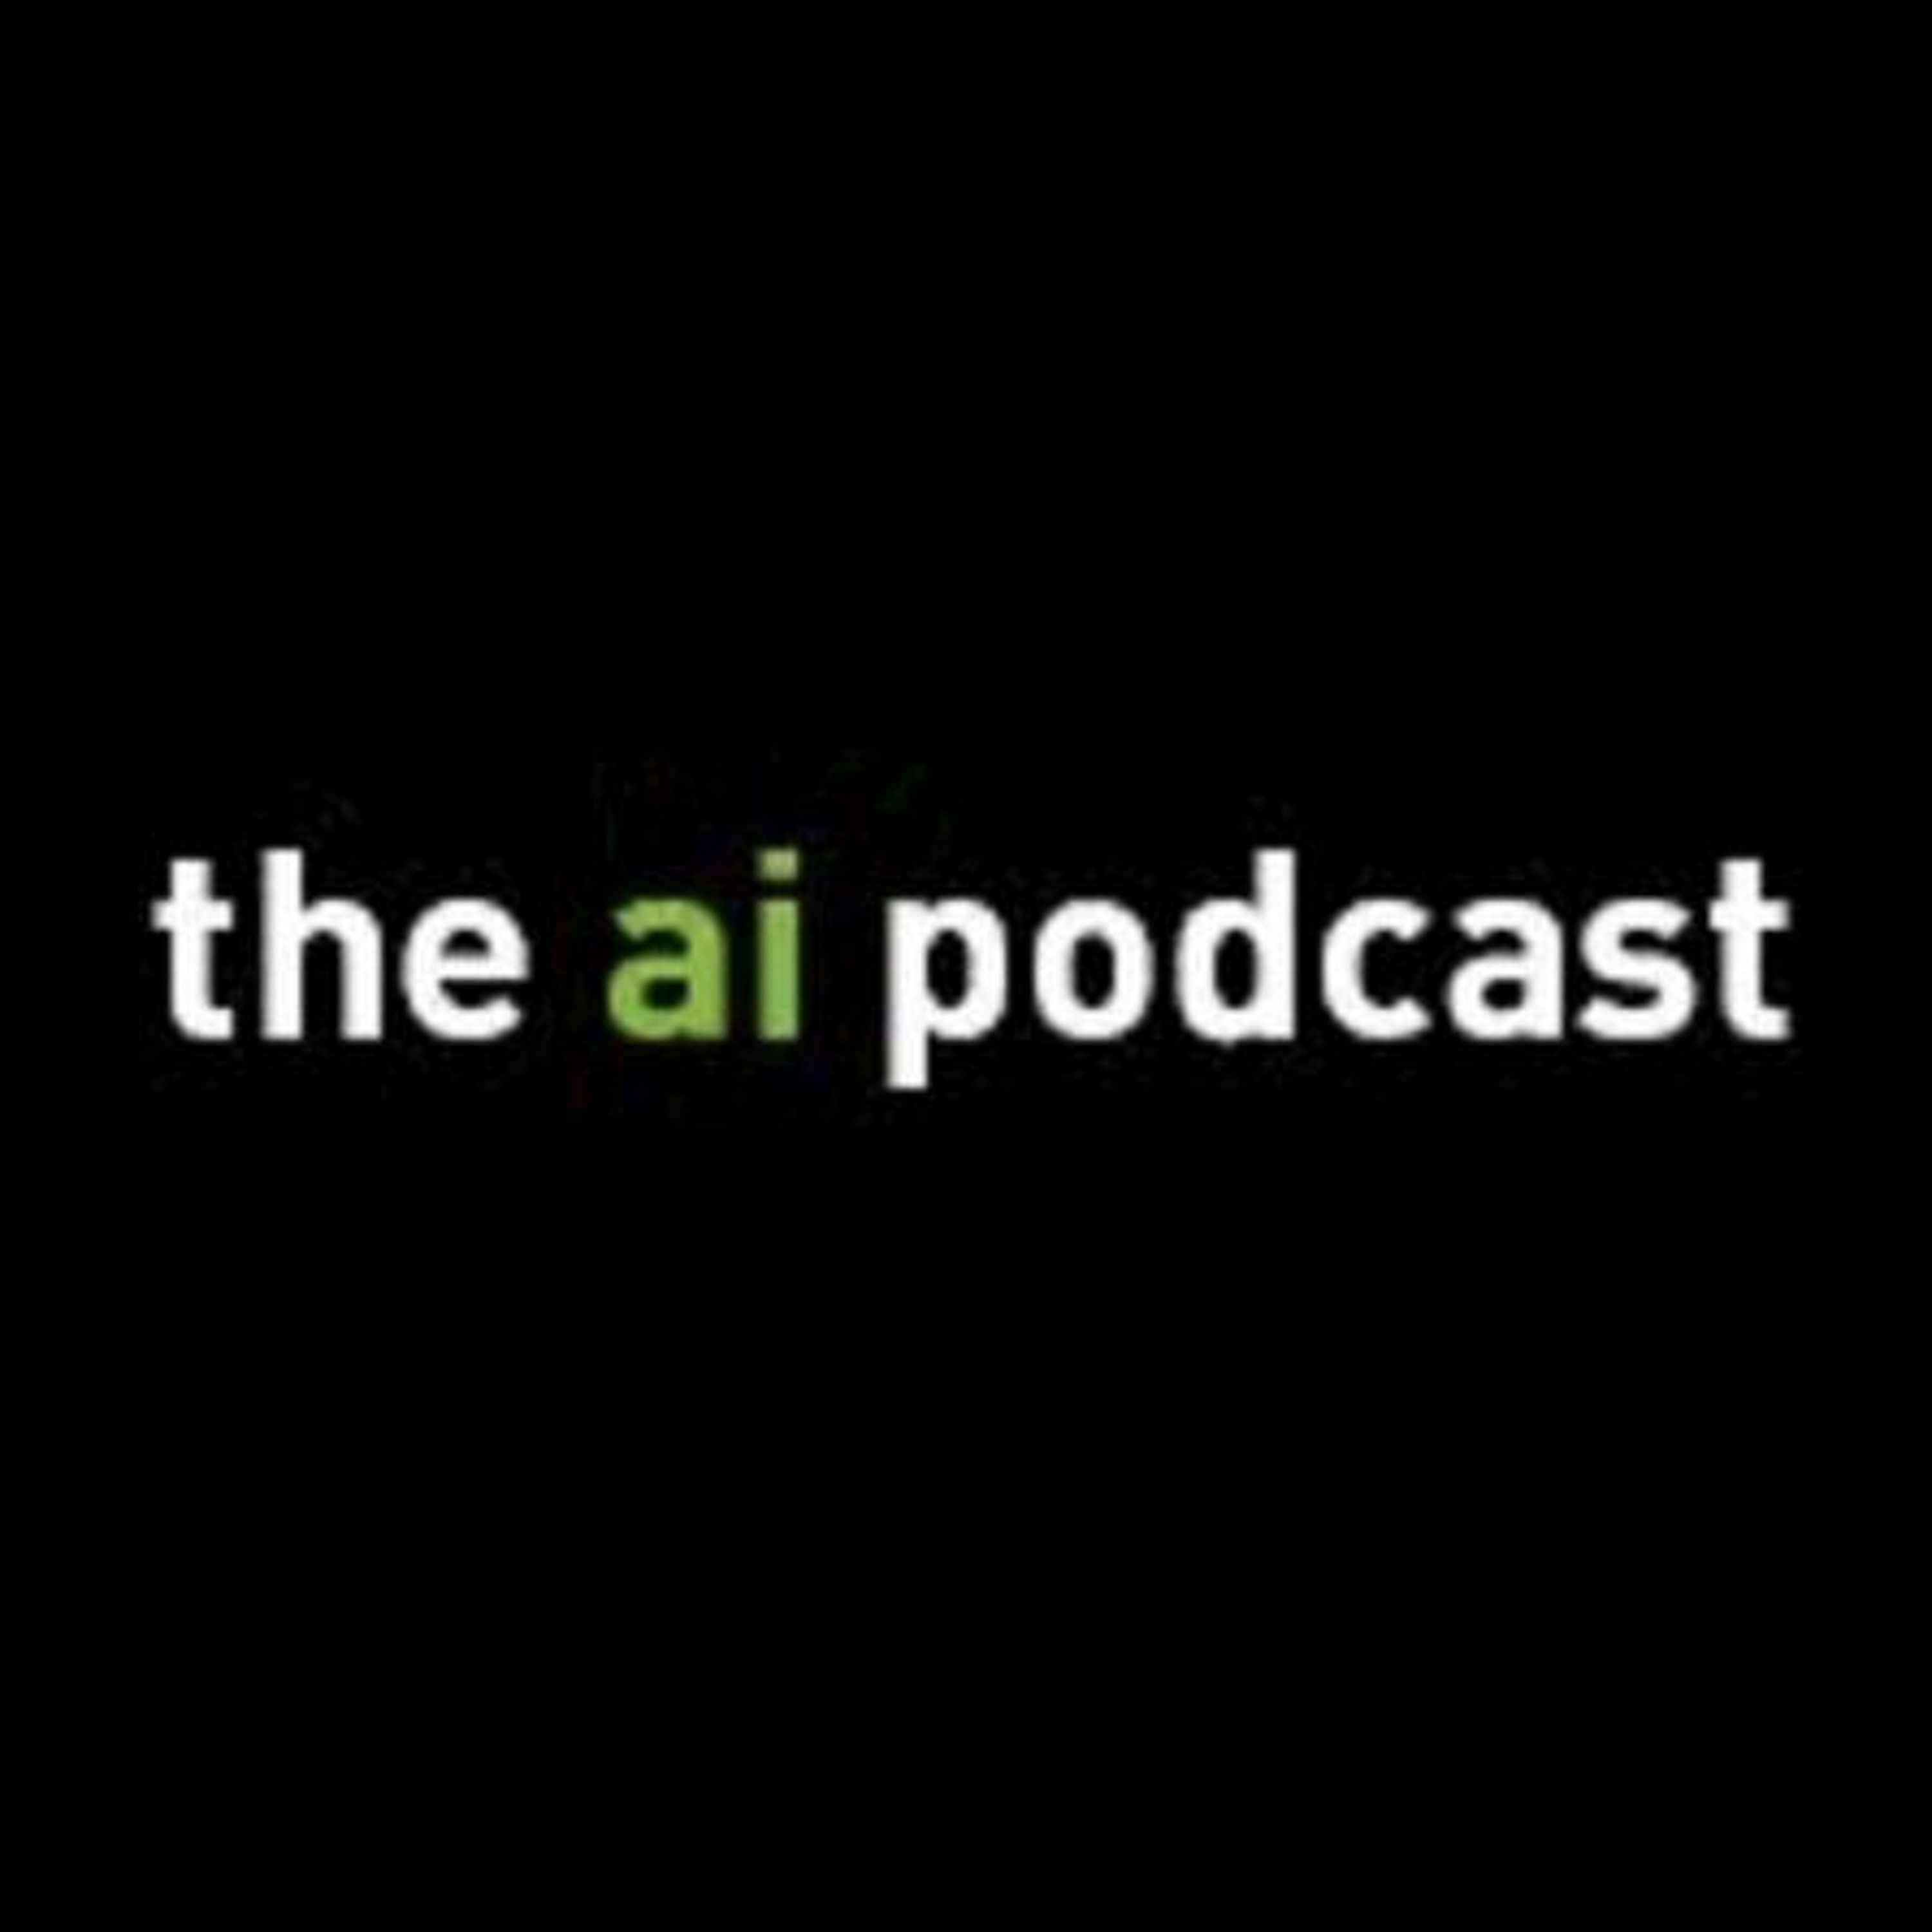 Netflix's Justin Basilico on How Entertainment and AI Intersect - Ep. 60